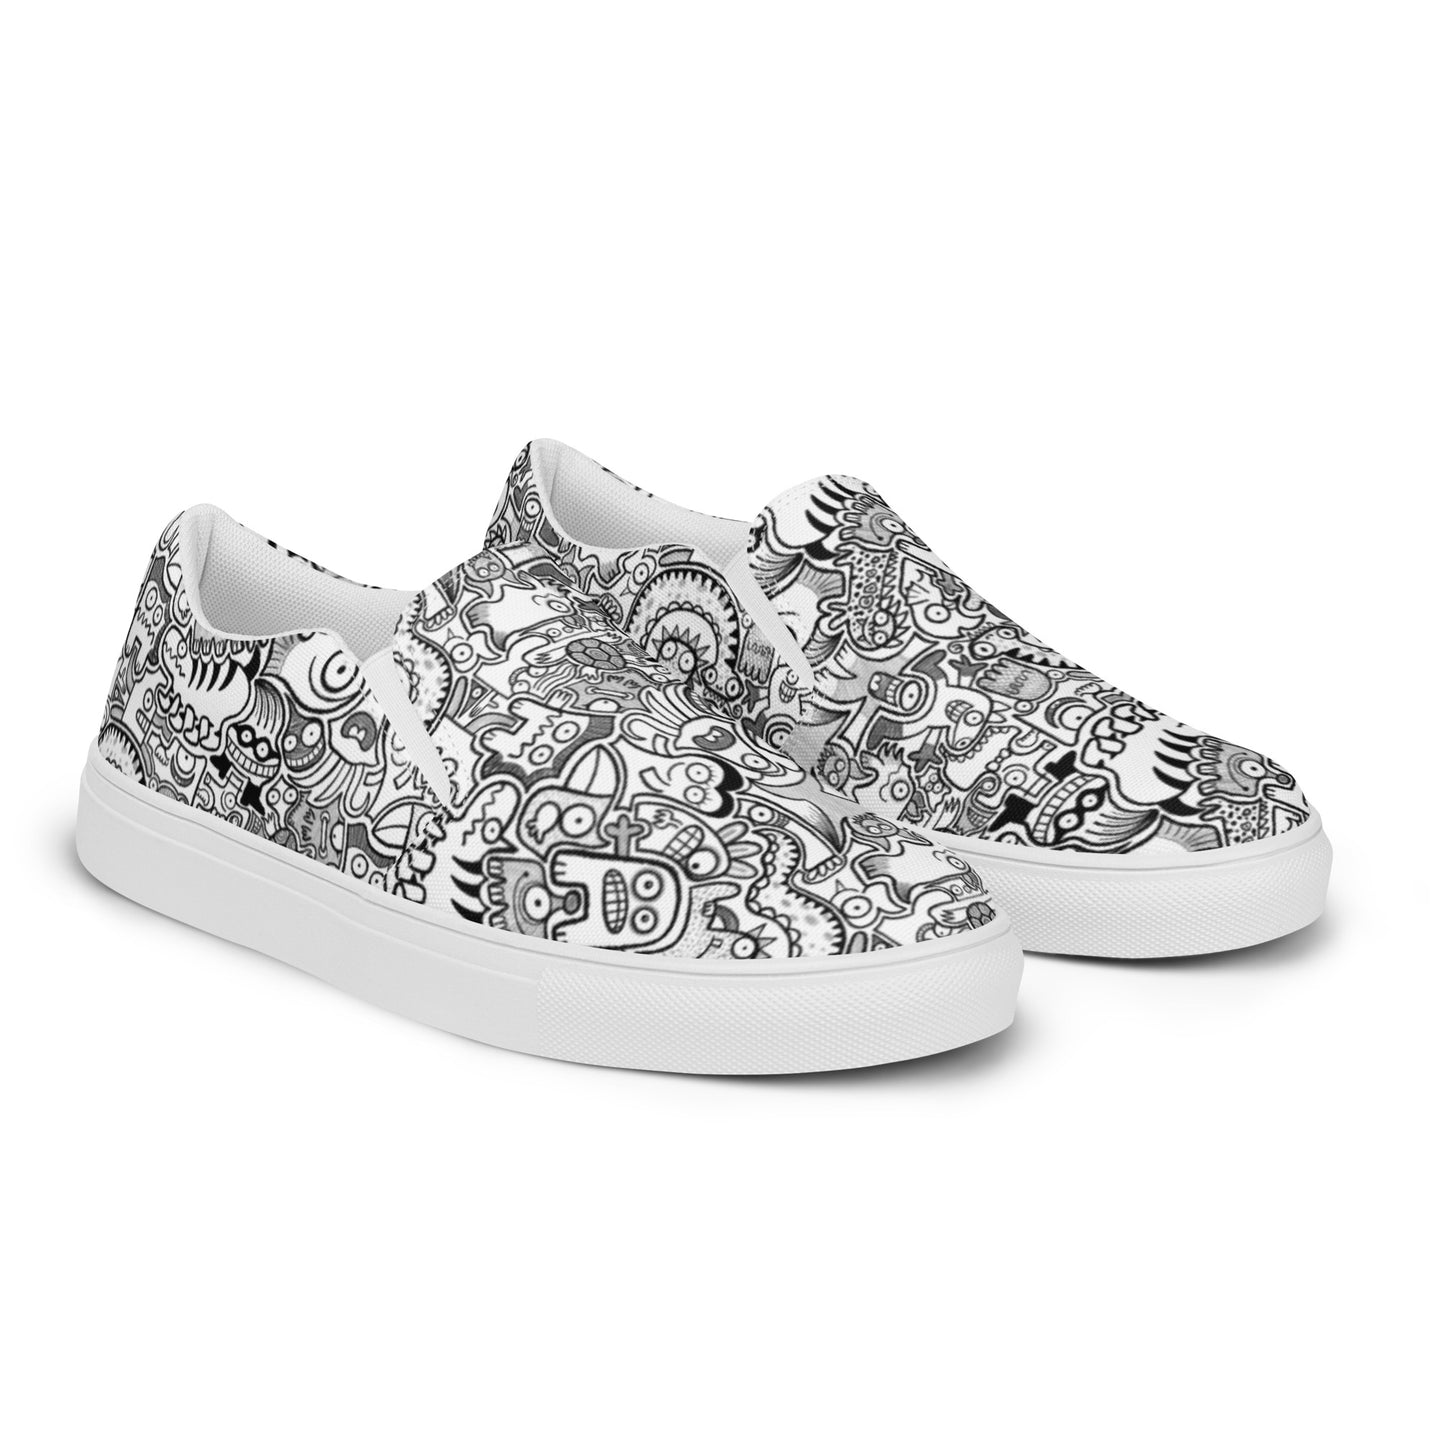 Fill your world with cool doodles Women’s slip-on canvas shoes. Overview